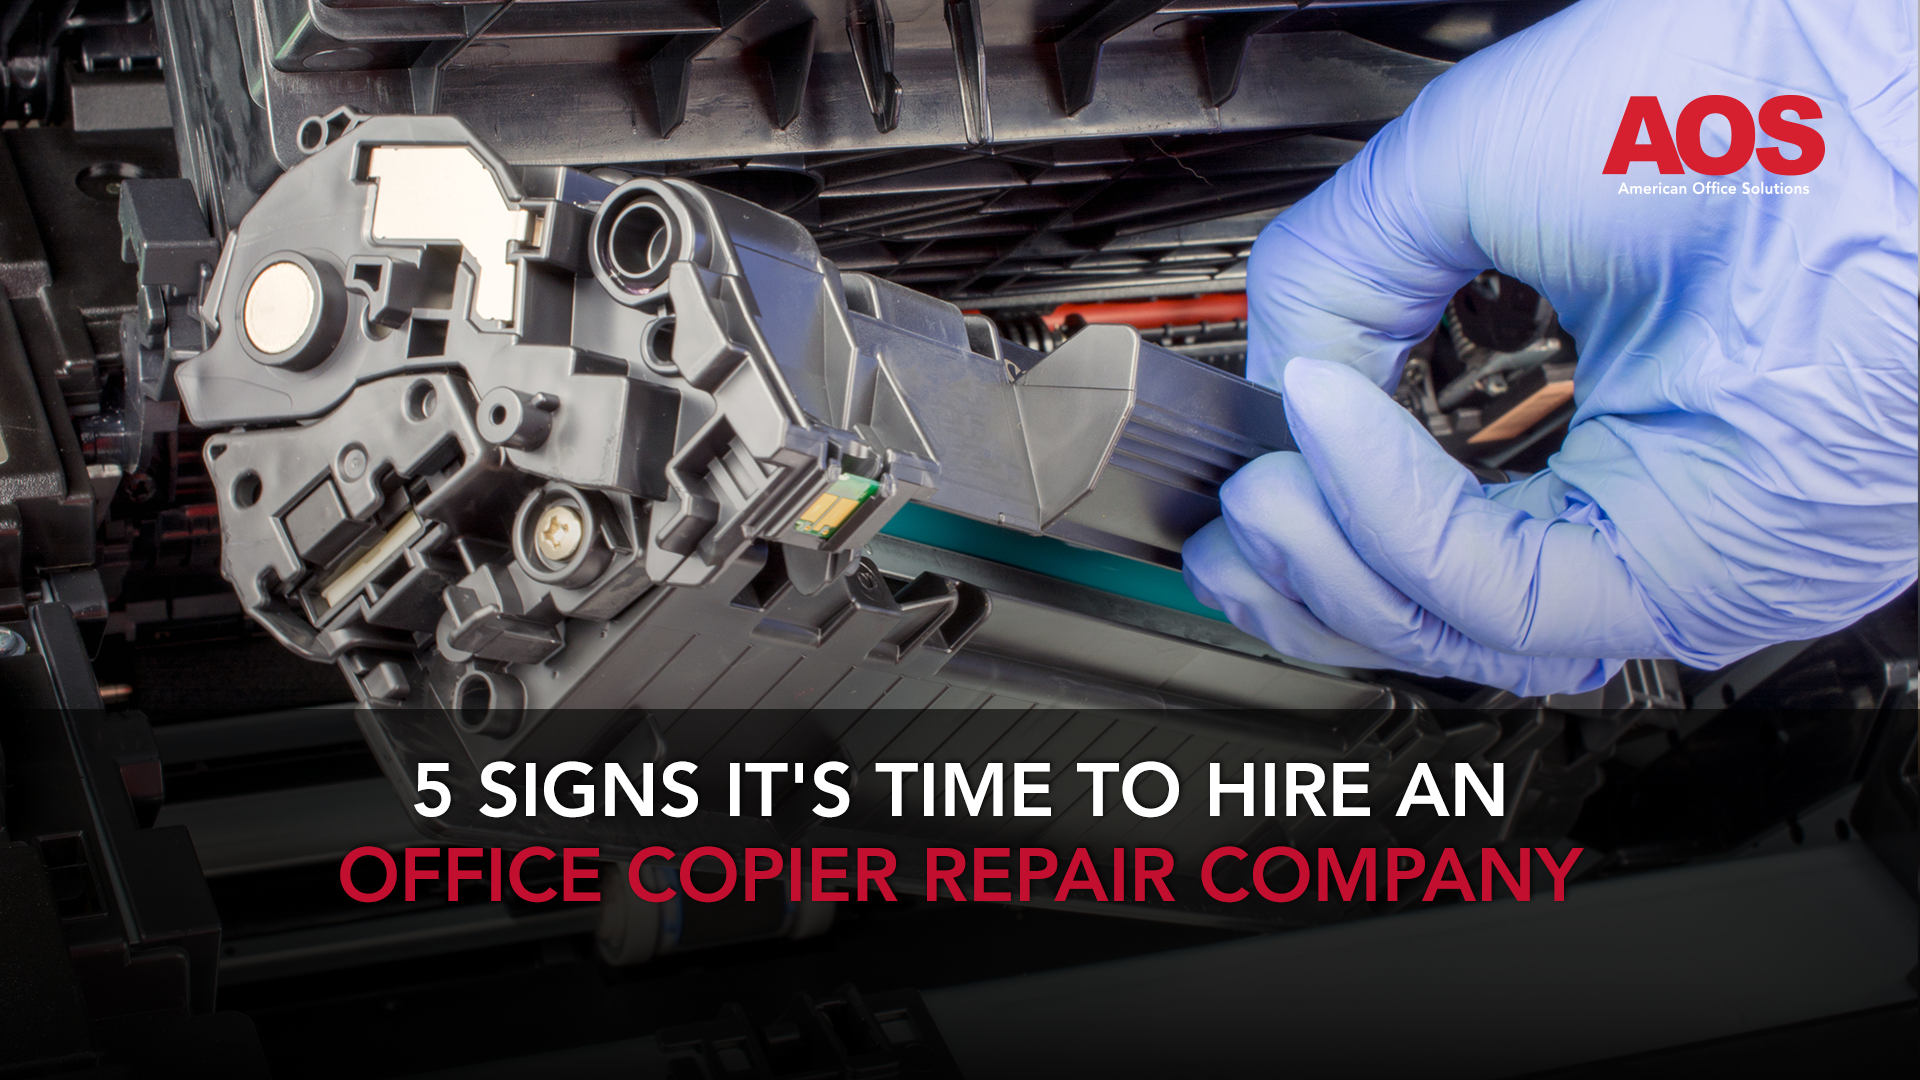 5 Signs It's Time to Hire an Office Copier Repair Company